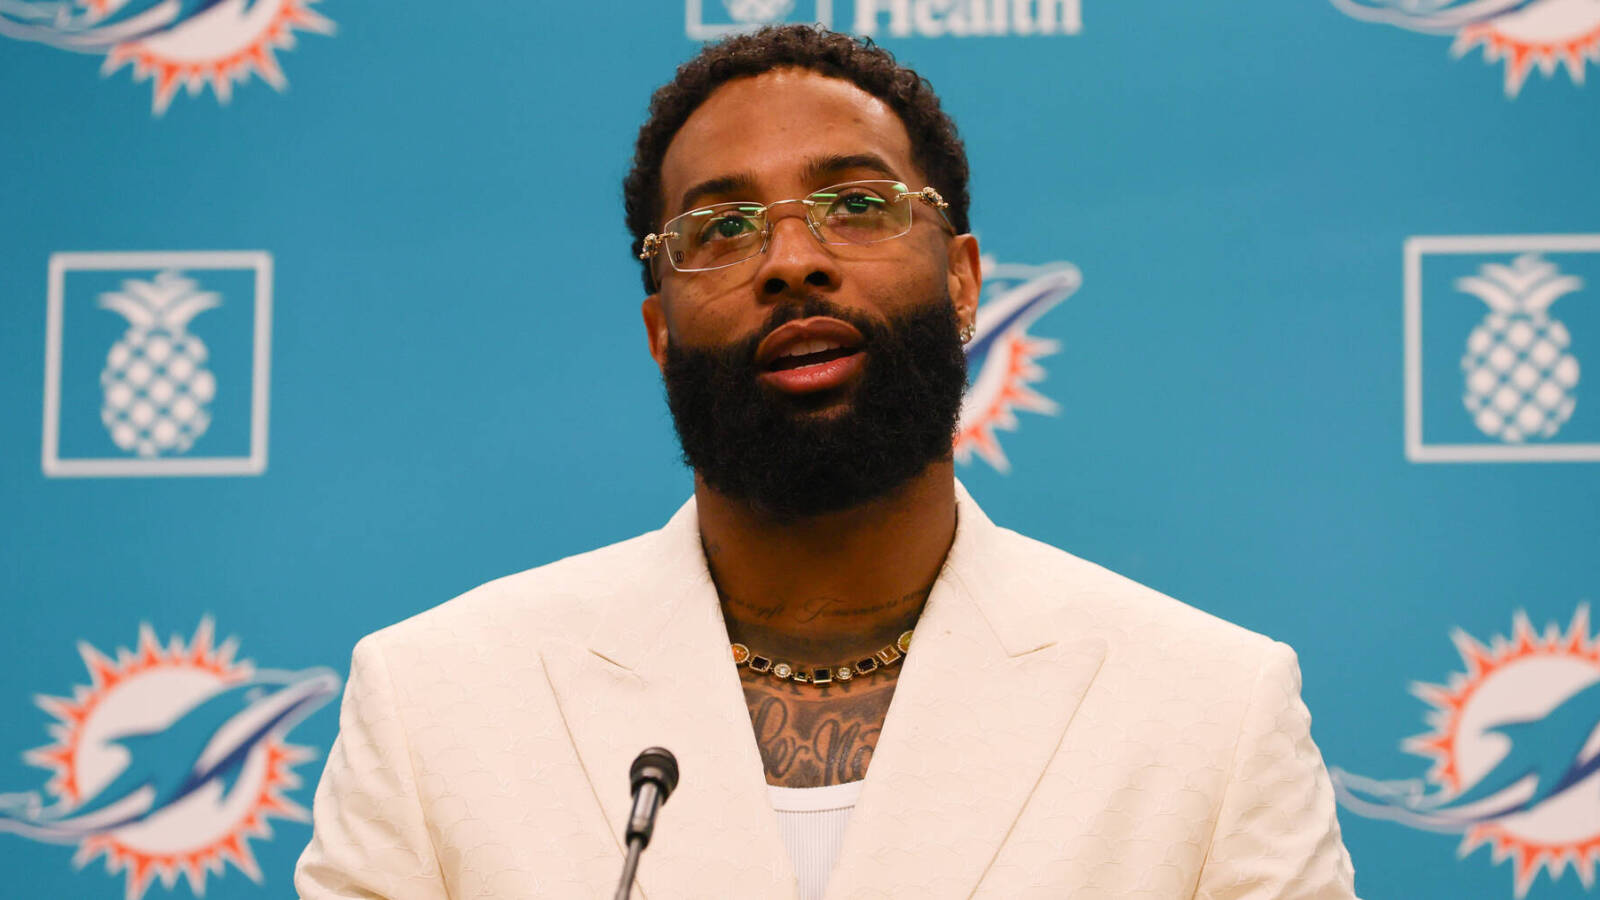 Odell Beckham Jr. reveals why he was 'hesitant' to join Dolphins